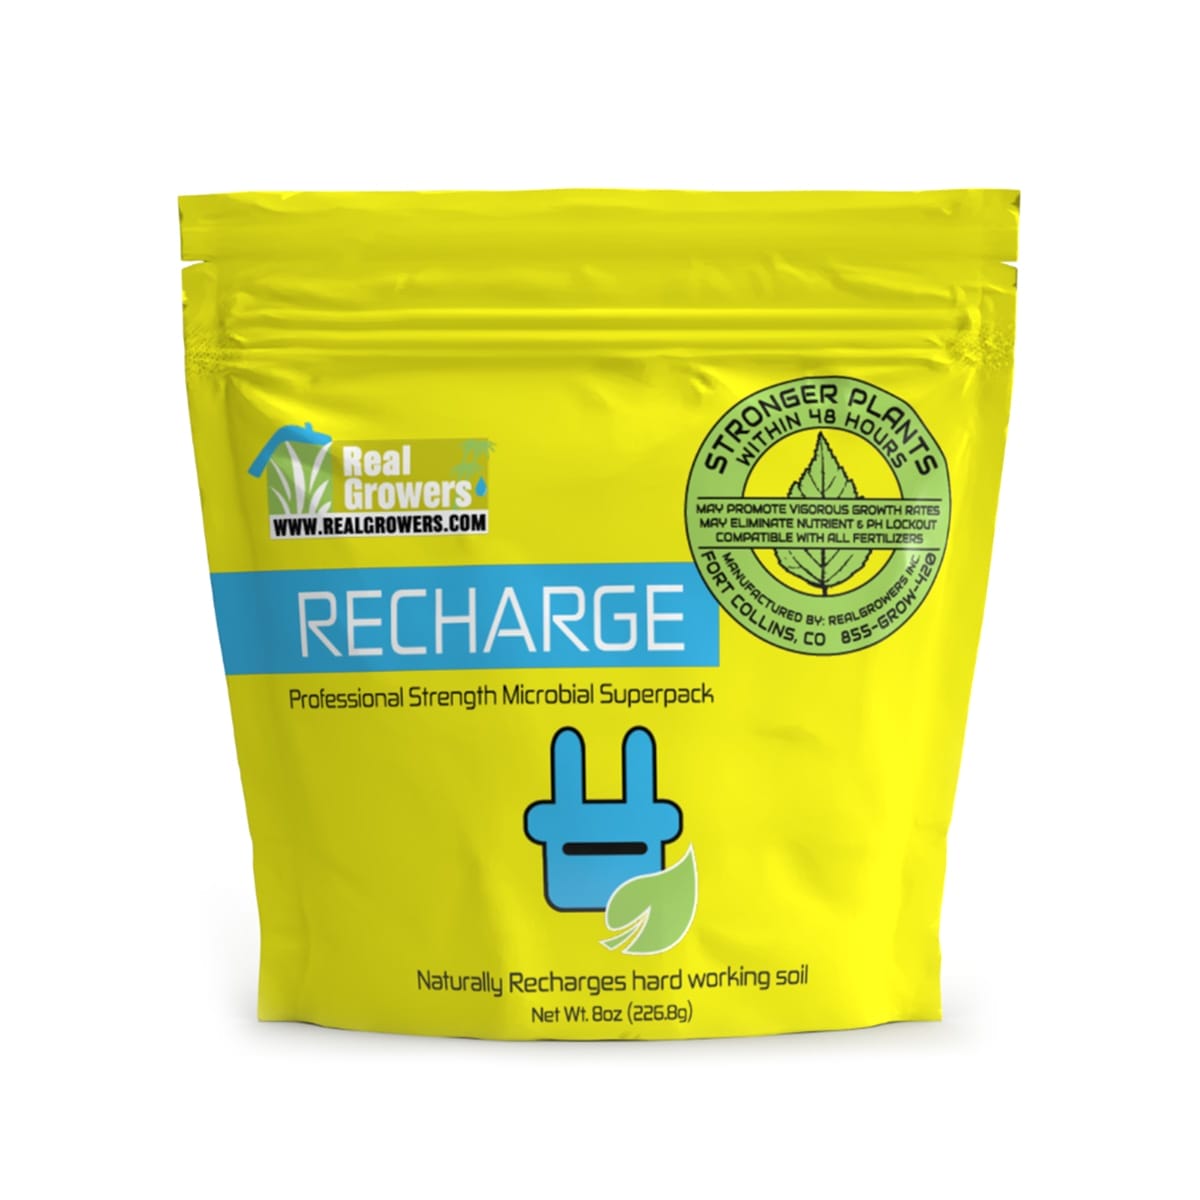 Real Growers Recharge 8oz